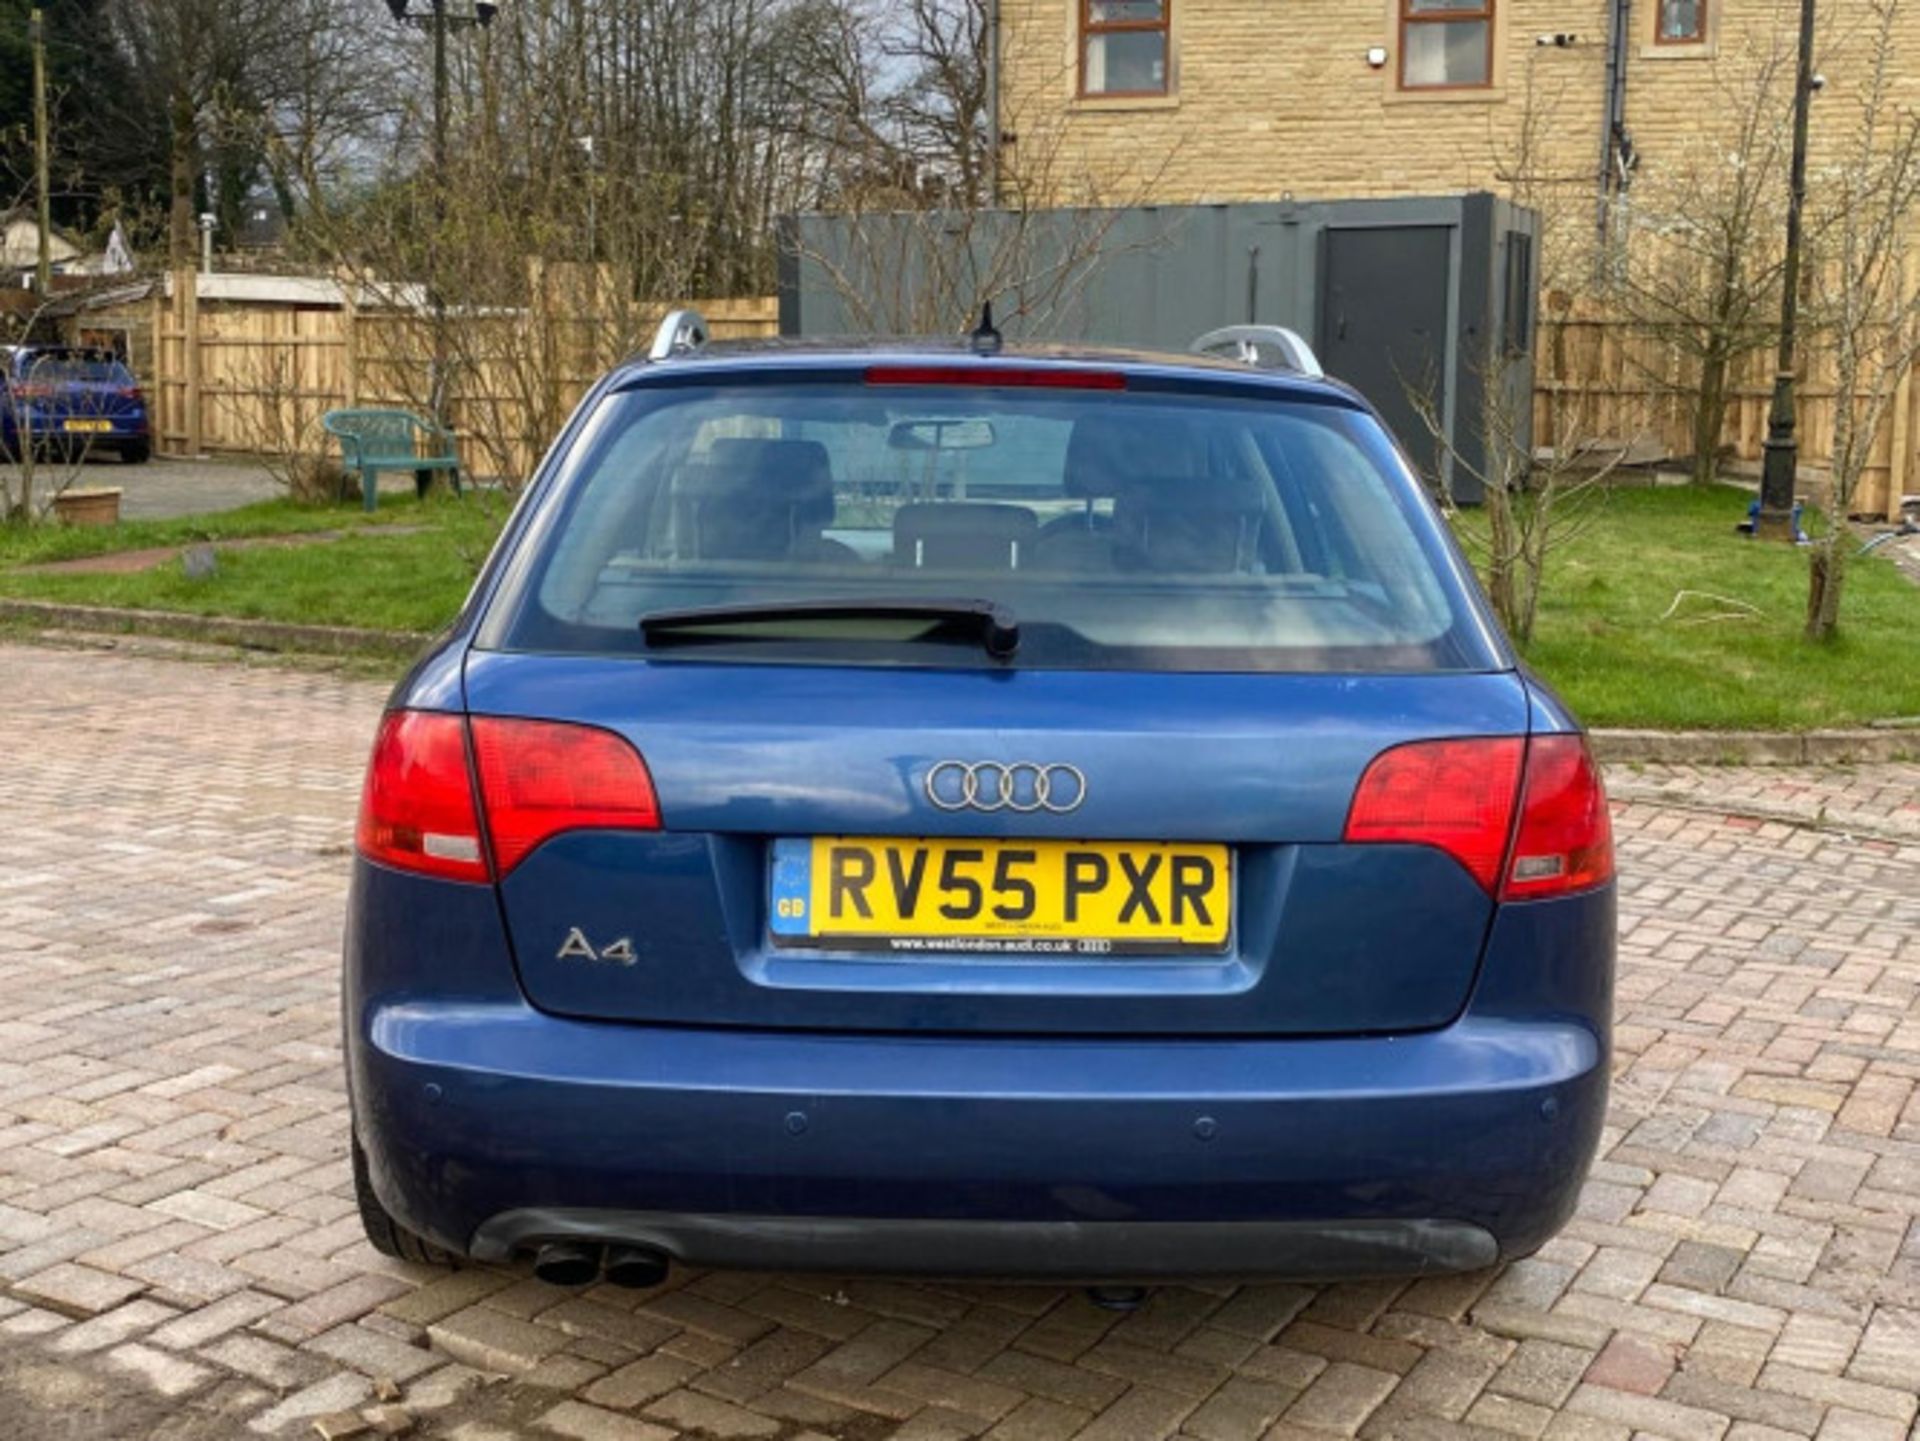 AUDI A4 AVANT 1.9 TDI SE 5DR ESTATE - RARE AND RELIABLE LUXURY WAGON >>--NO VAT ON HAMMER--<< - Image 88 of 97